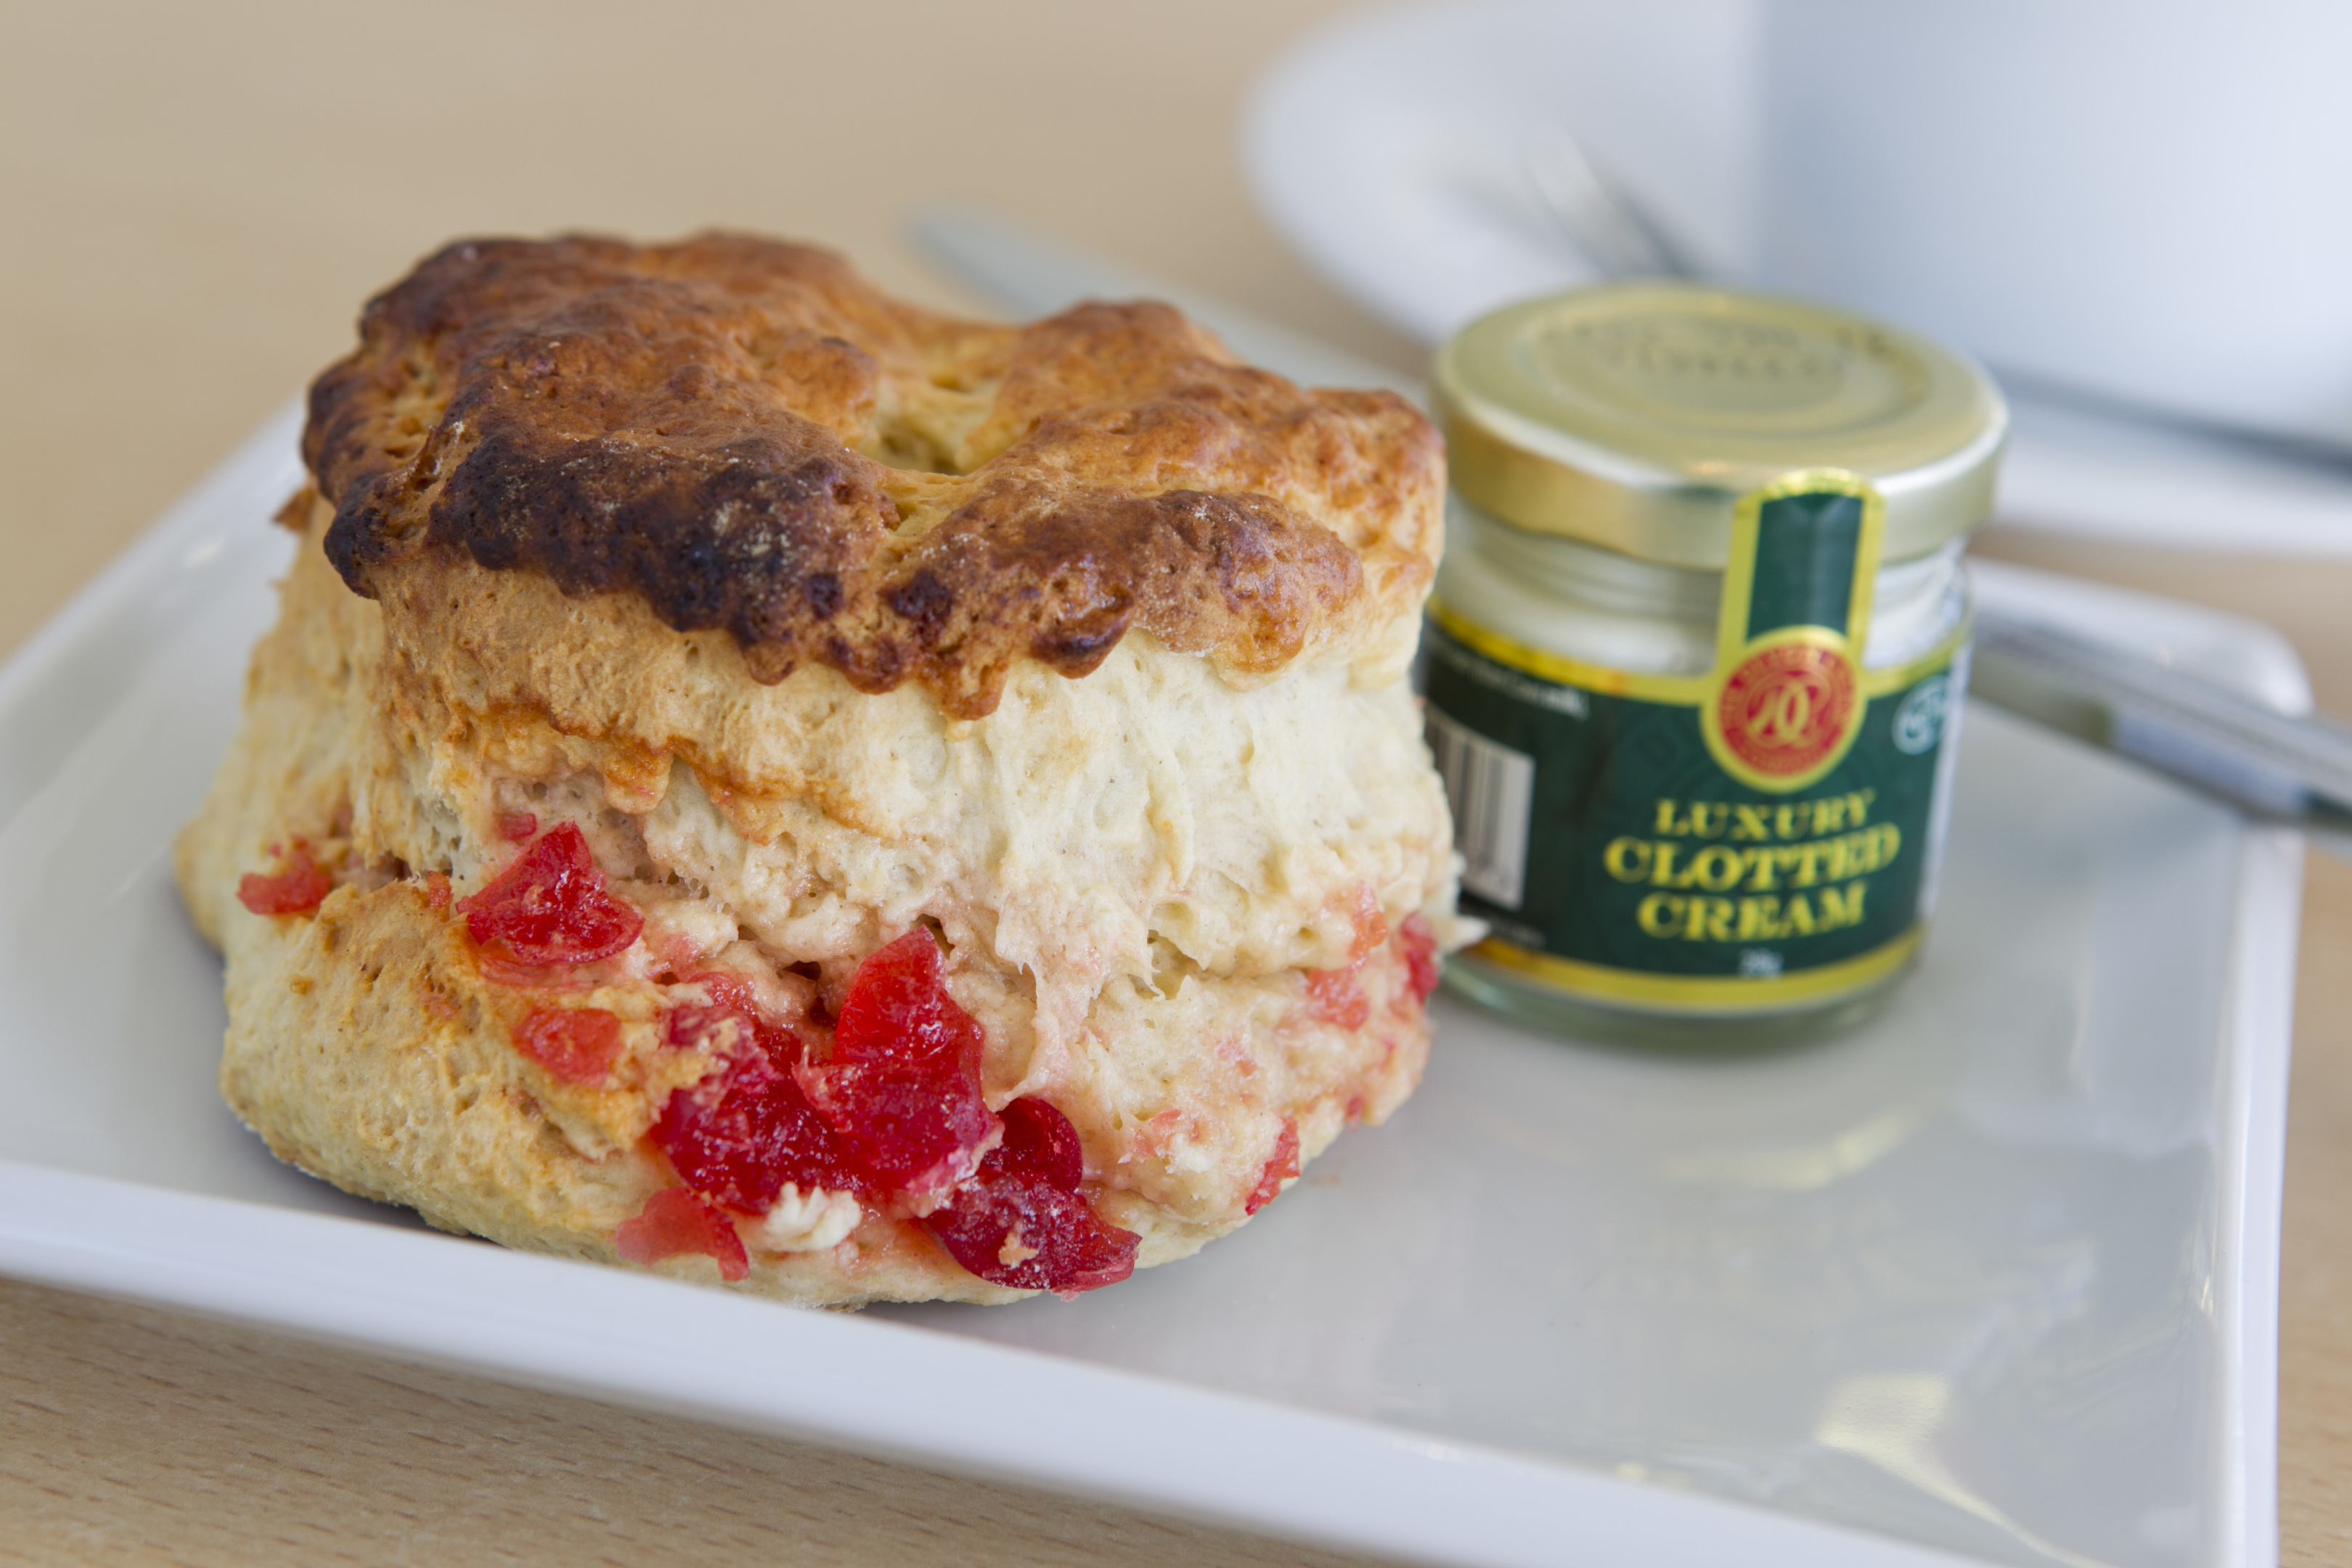 A delicious cherry scone with clotted cream at Sands (Andrew Cawley / DC Thomson)